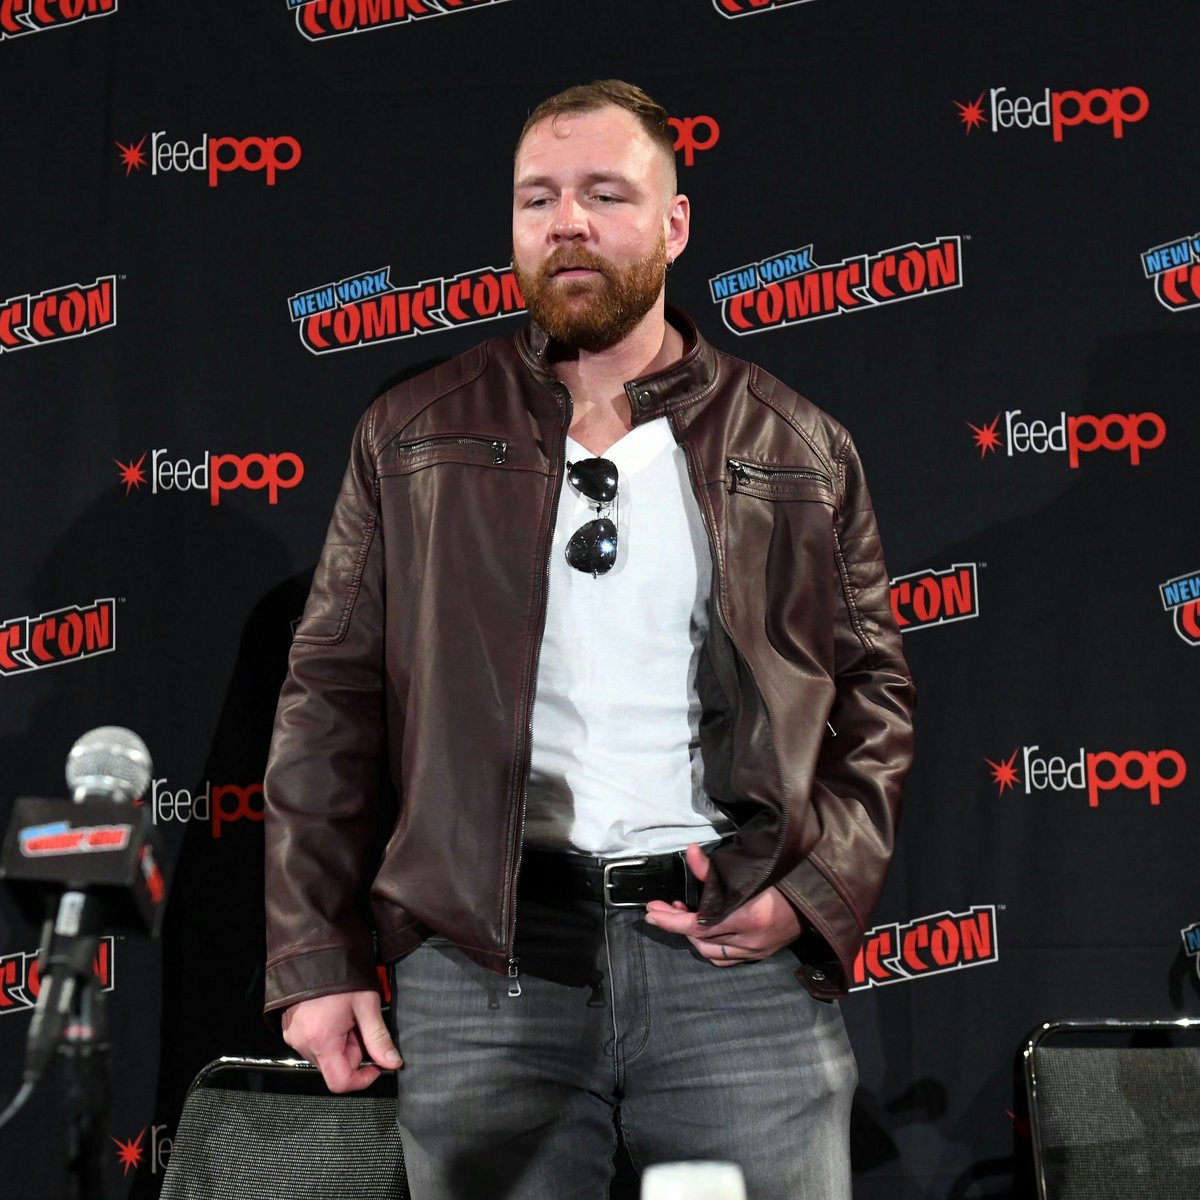 #NewProfilePic Handsome pic of The #DeathRider, @JonMoxley in his favorite Leather Jacket at #NYCC2019. Current reigning #IWGPUSHeavyweightChampion and soon-to-be #AEWWorldChampion. At the top of the #ProWrestling World. Love you lots, Mox.😍😍😍😍😘😘😘😘❤❤❤❤